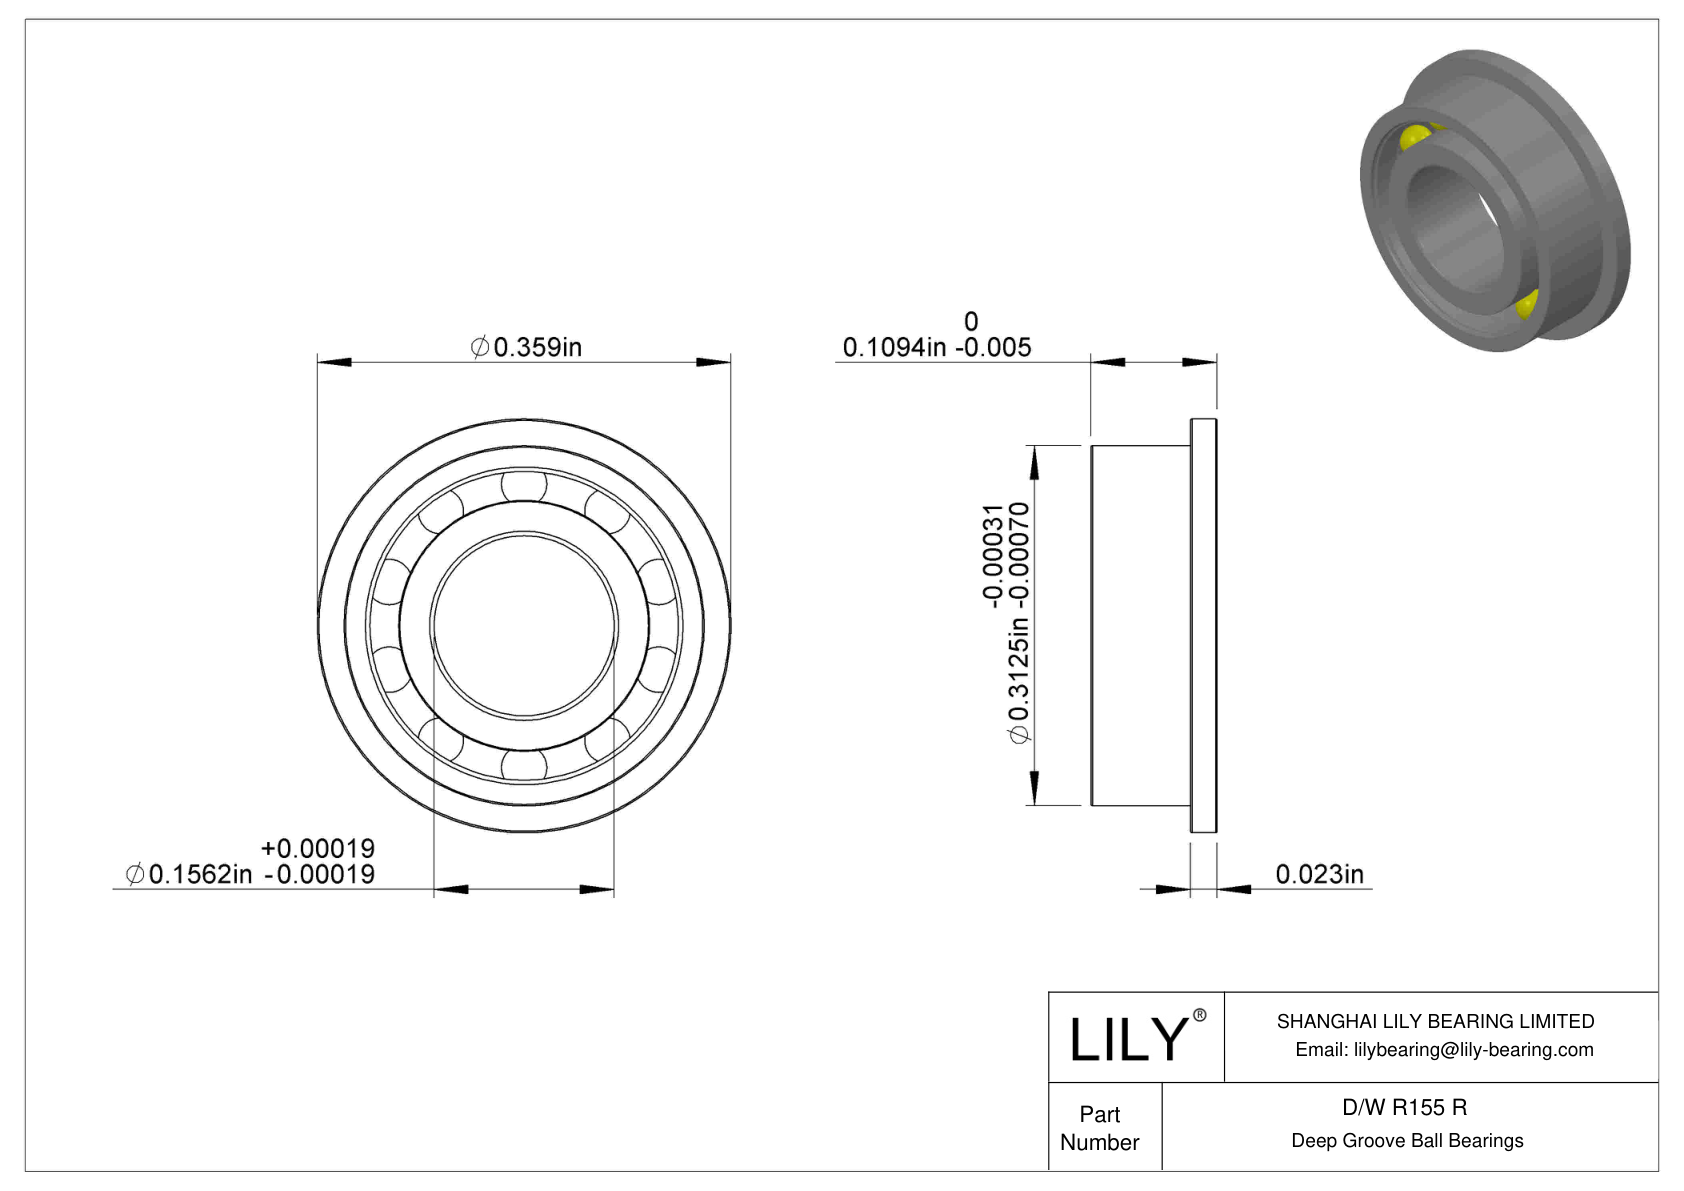 D/W R155 R Flanged Ball Bearings cad drawing